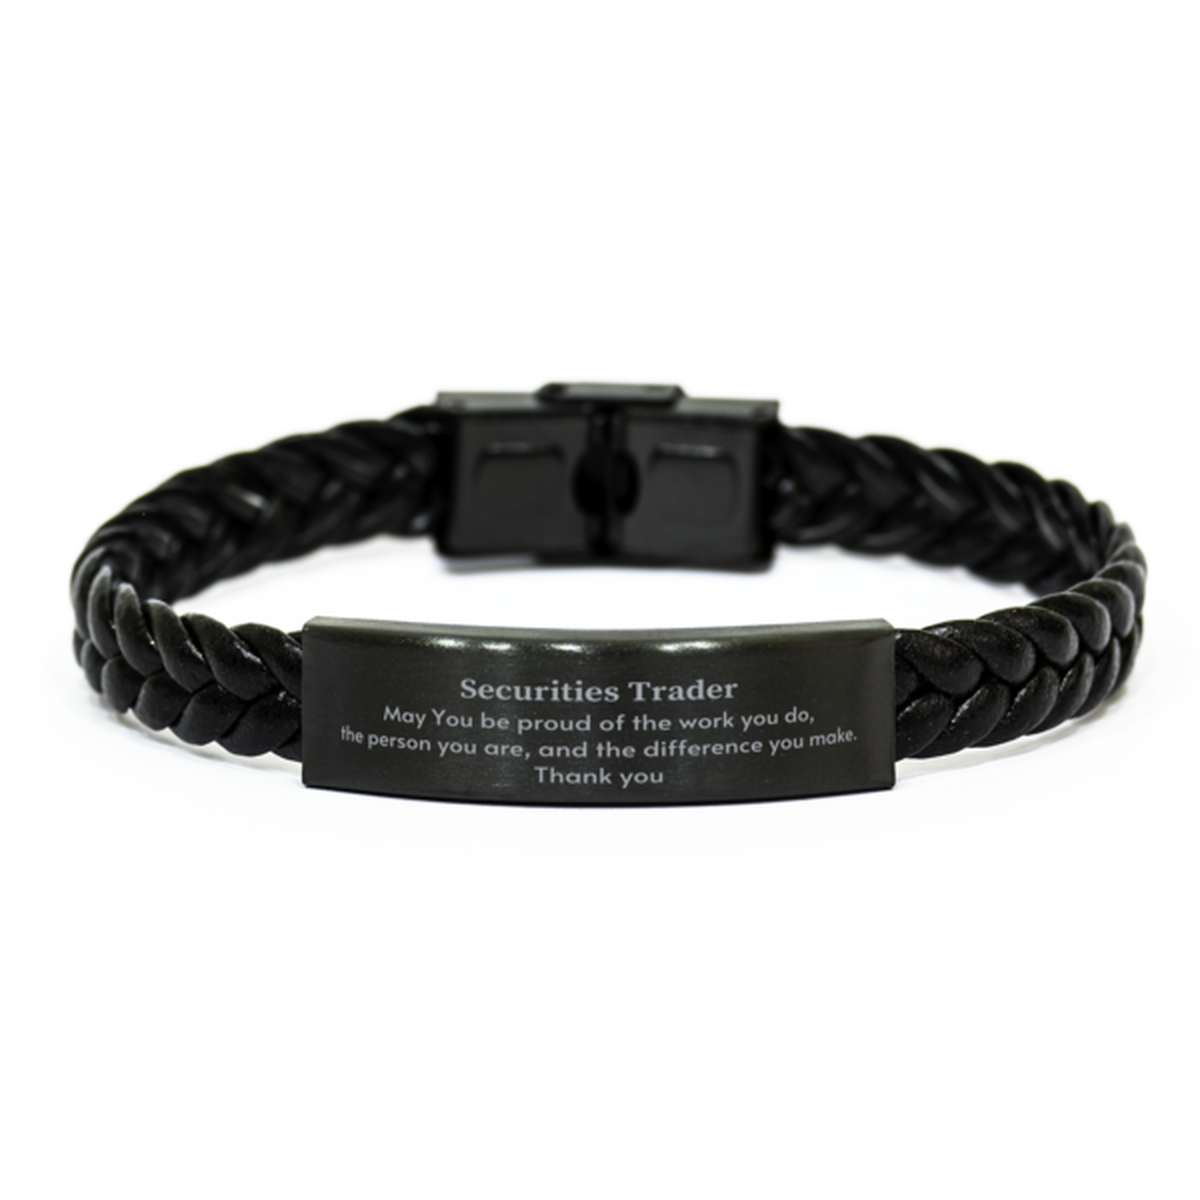 Heartwarming Braided Leather Bracelet Retirement Coworkers Gifts for Securities Trader, Securities Trader May You be proud of the work you do, the person you are Gifts for Boss Men Women Friends